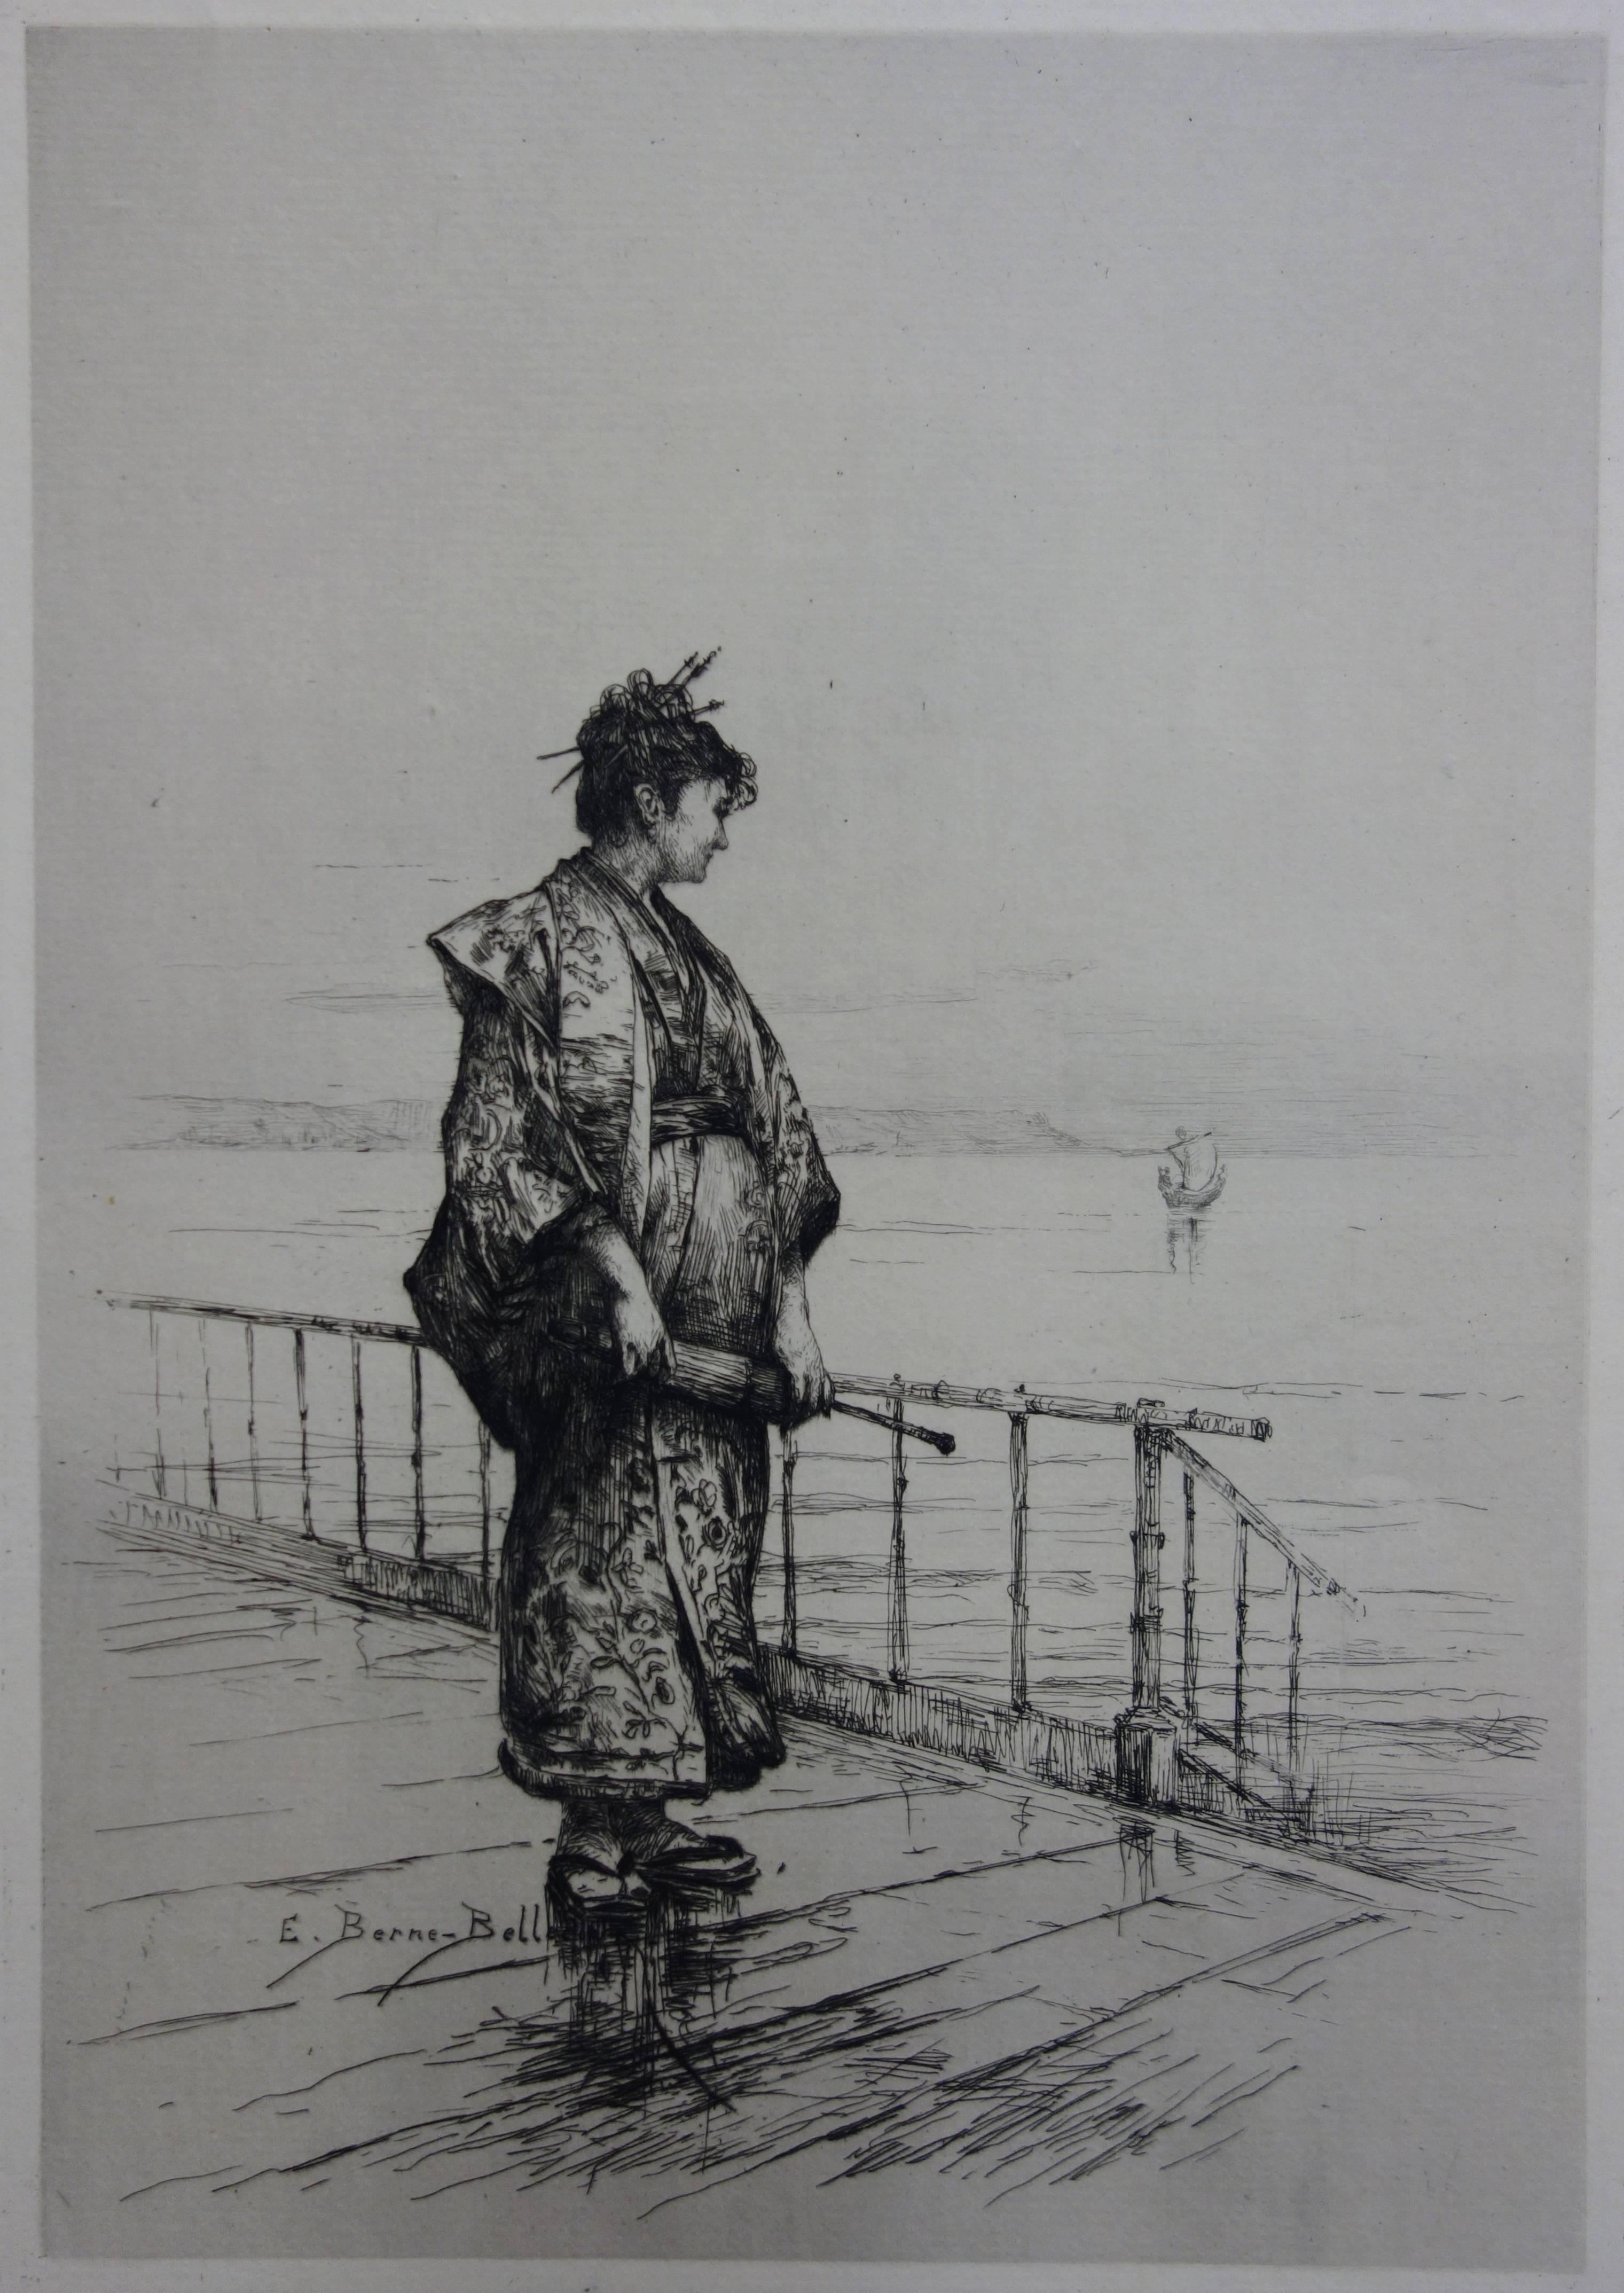 Woman in Traditional Japanese Suit Looking at the Sea - Original etching